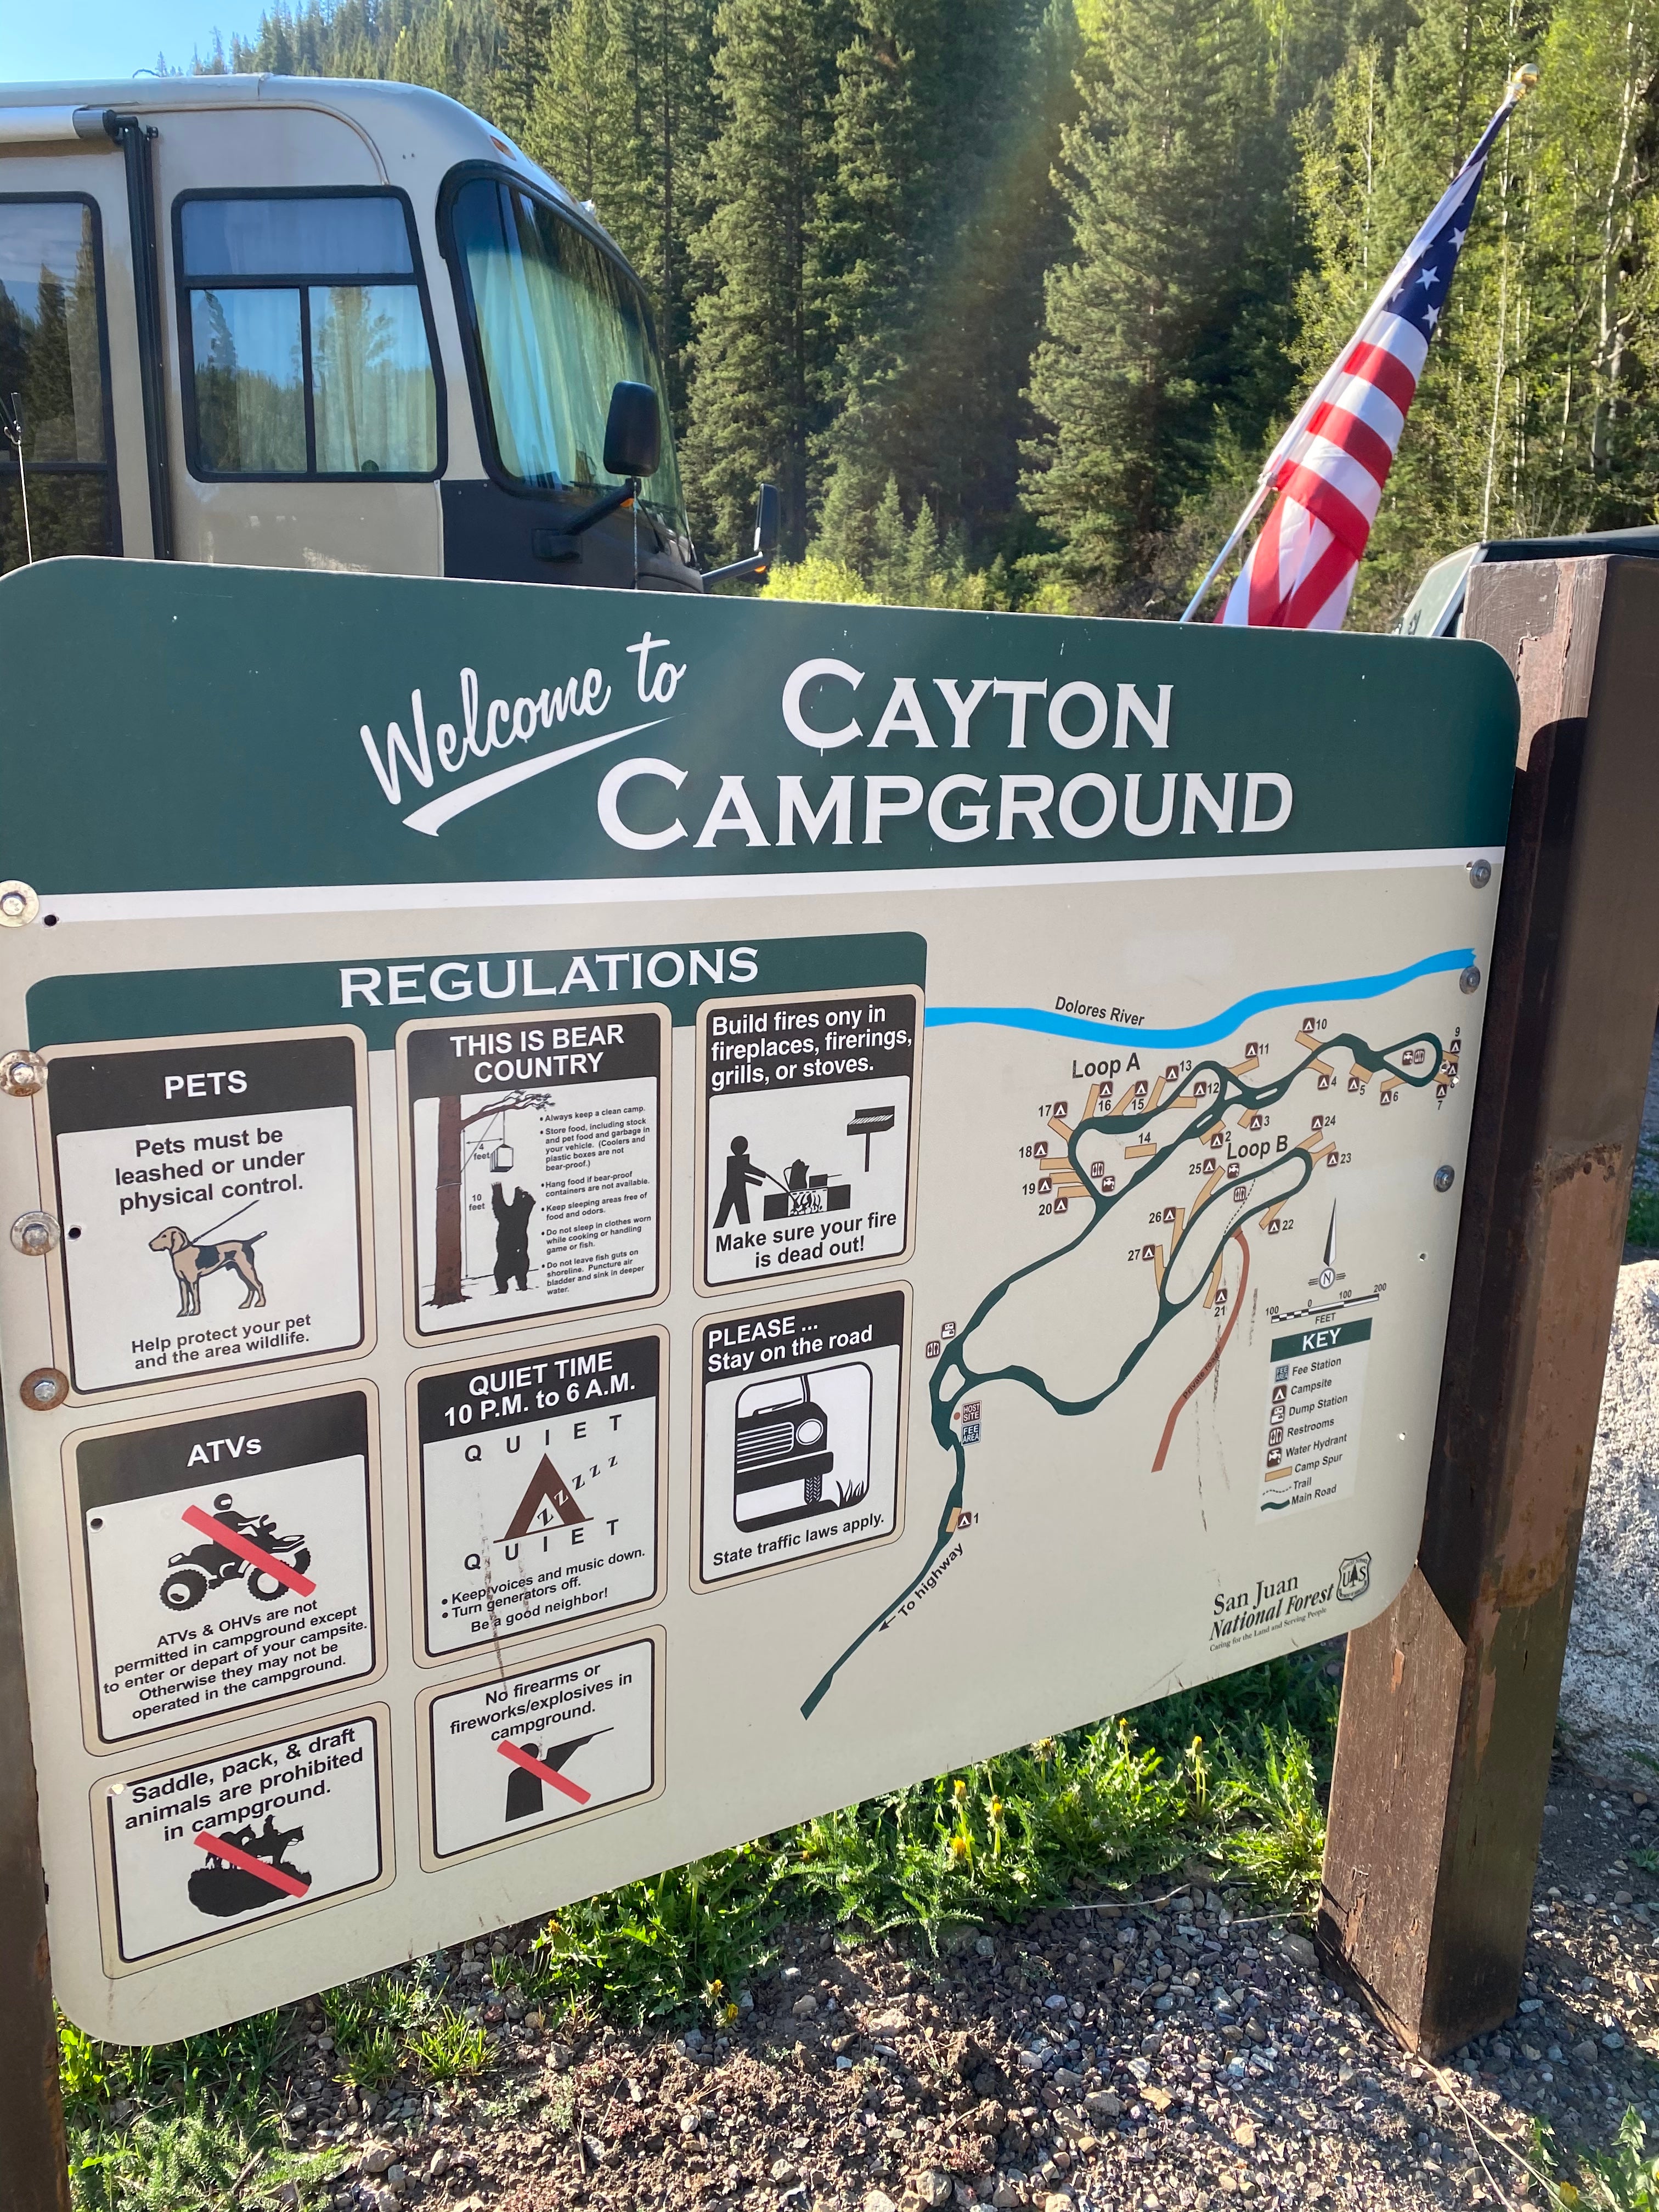 Camper submitted image from Cayton Campground - 4